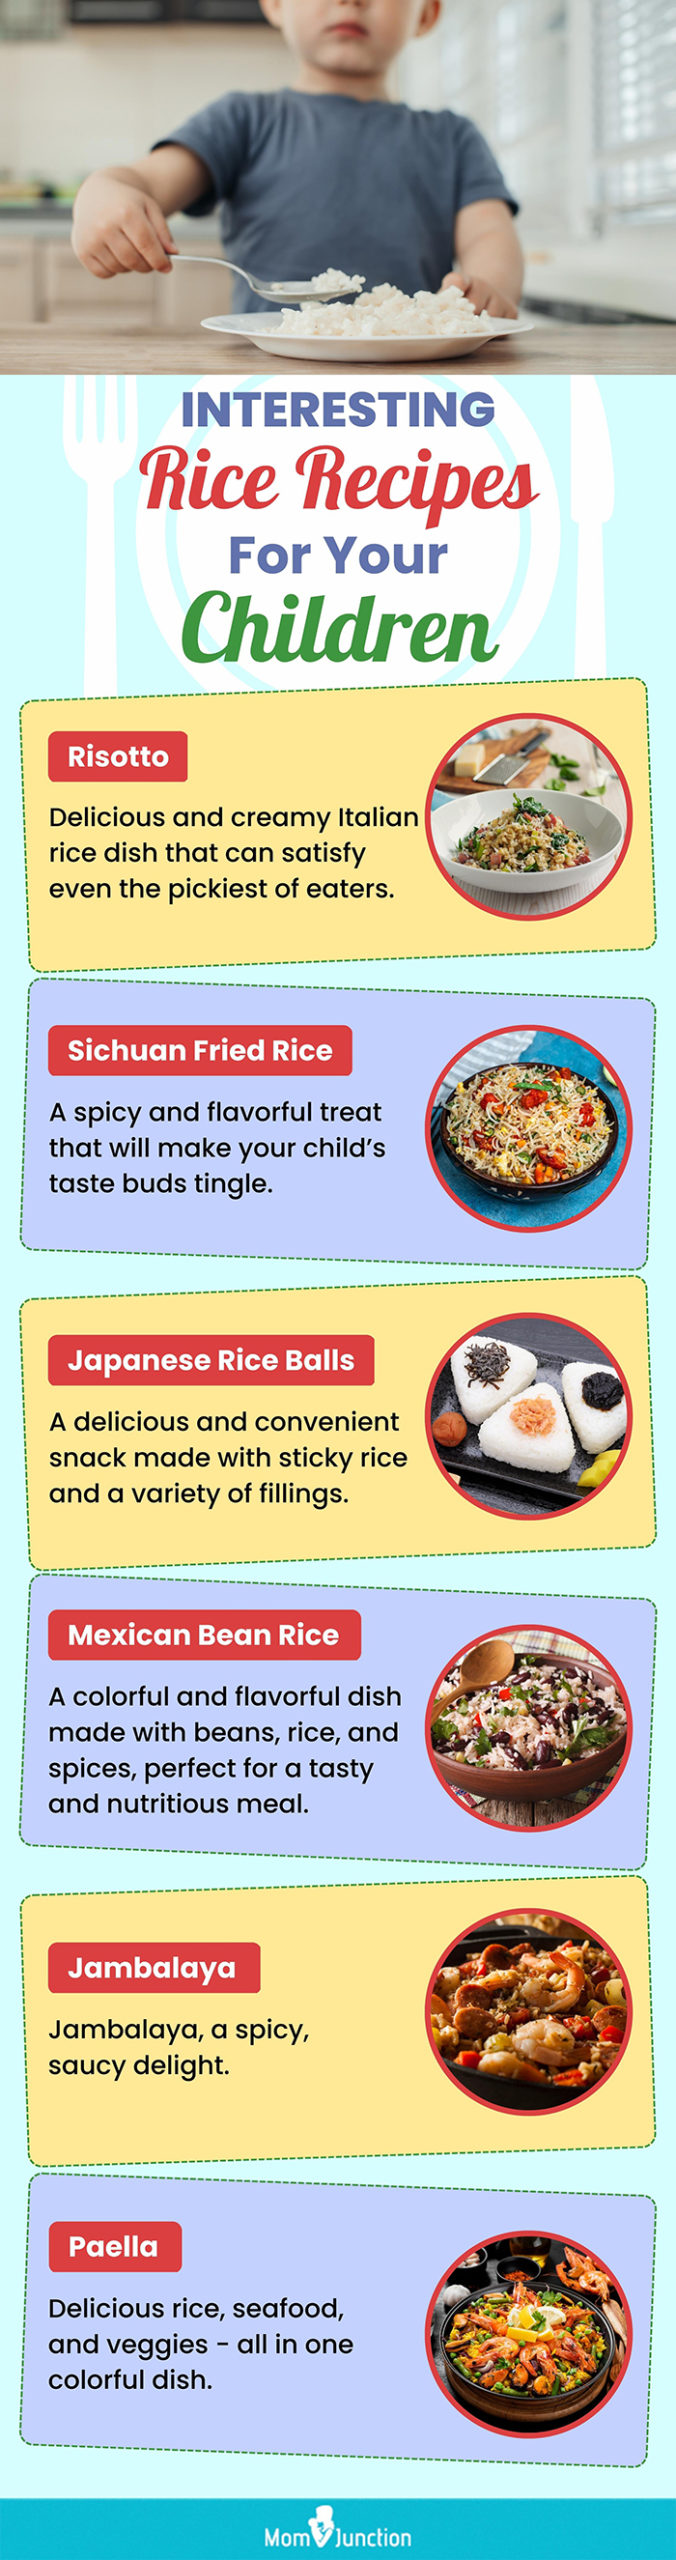 interesting rice recipes for your children (infographic)